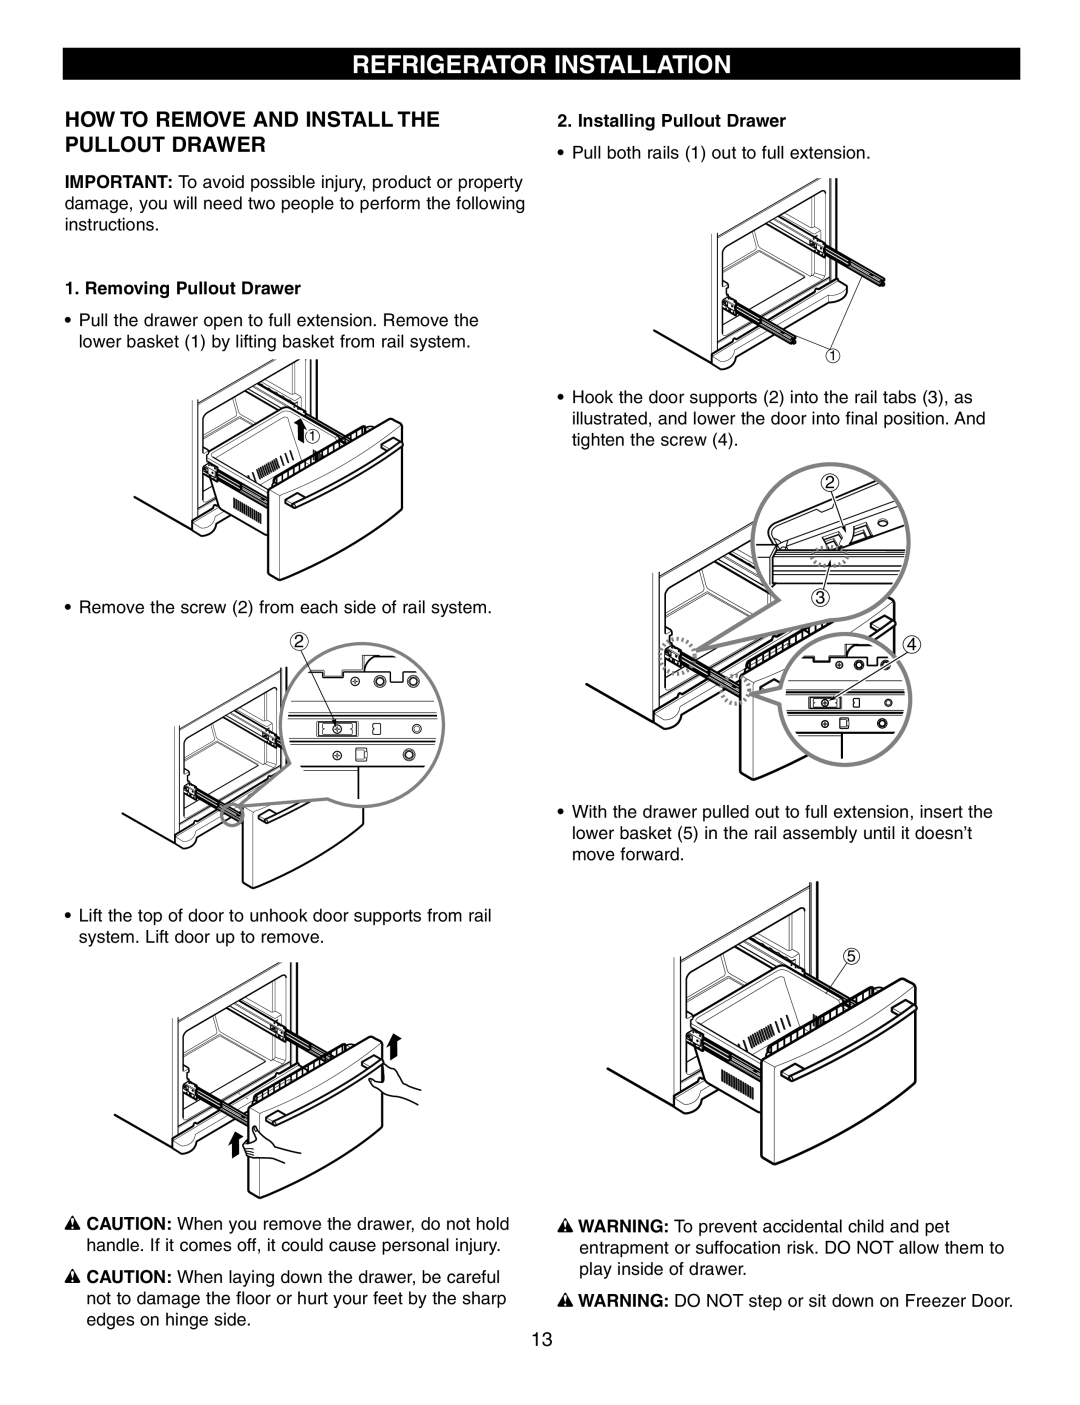 LG Electronics LRFD21855 Refrigerator Installation, How To Remove And Install The Pullout Drawer, Removing Pullout Drawer 